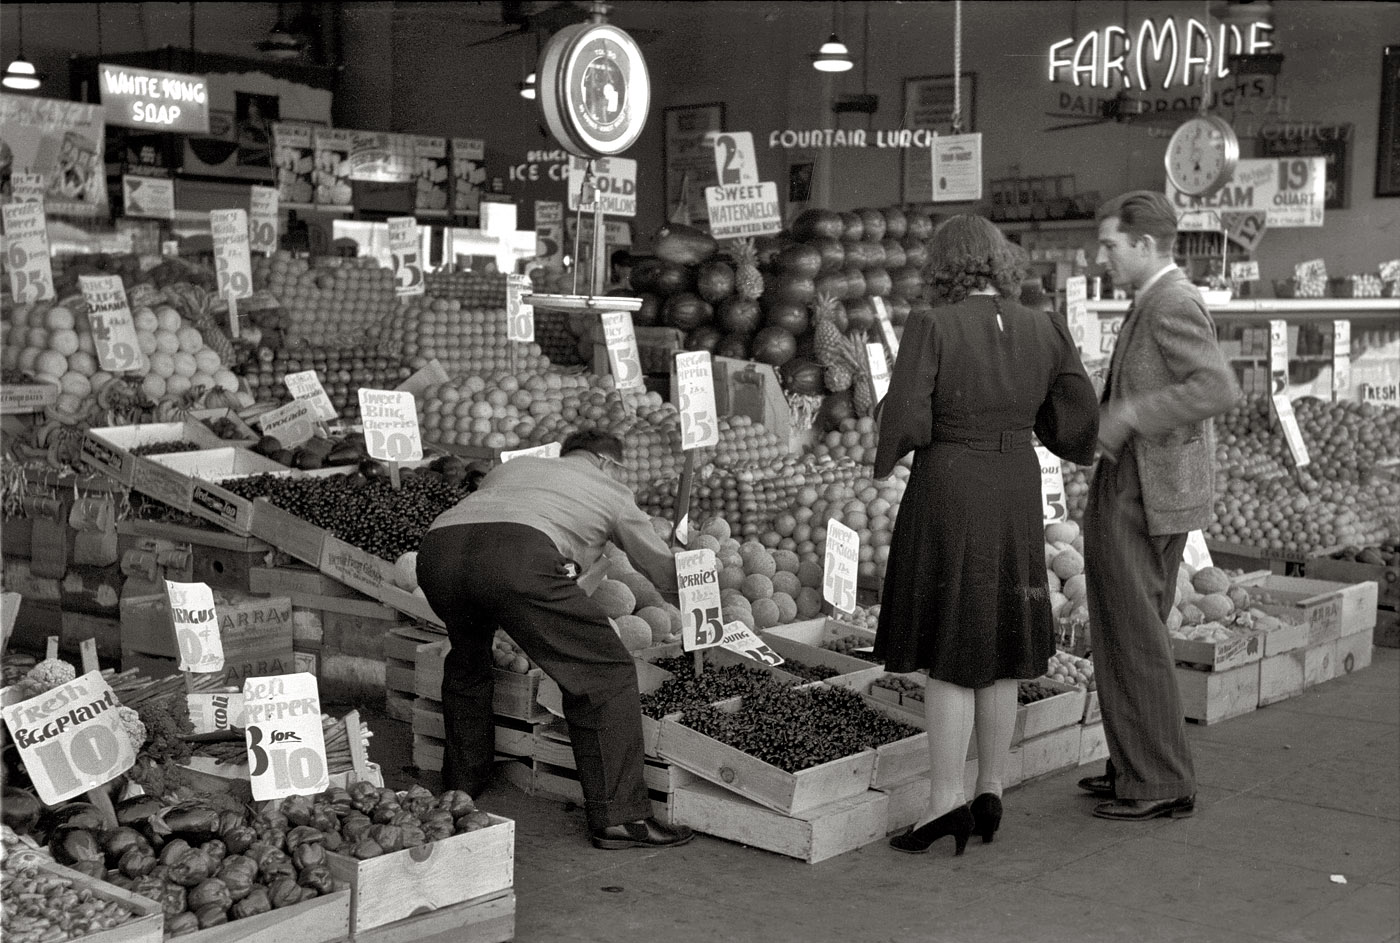 June 1941. Shopping for fruit and vegetables in San Diego. View full size. 35mm nitrate negative by Russell Lee for the Farm Security Administration.